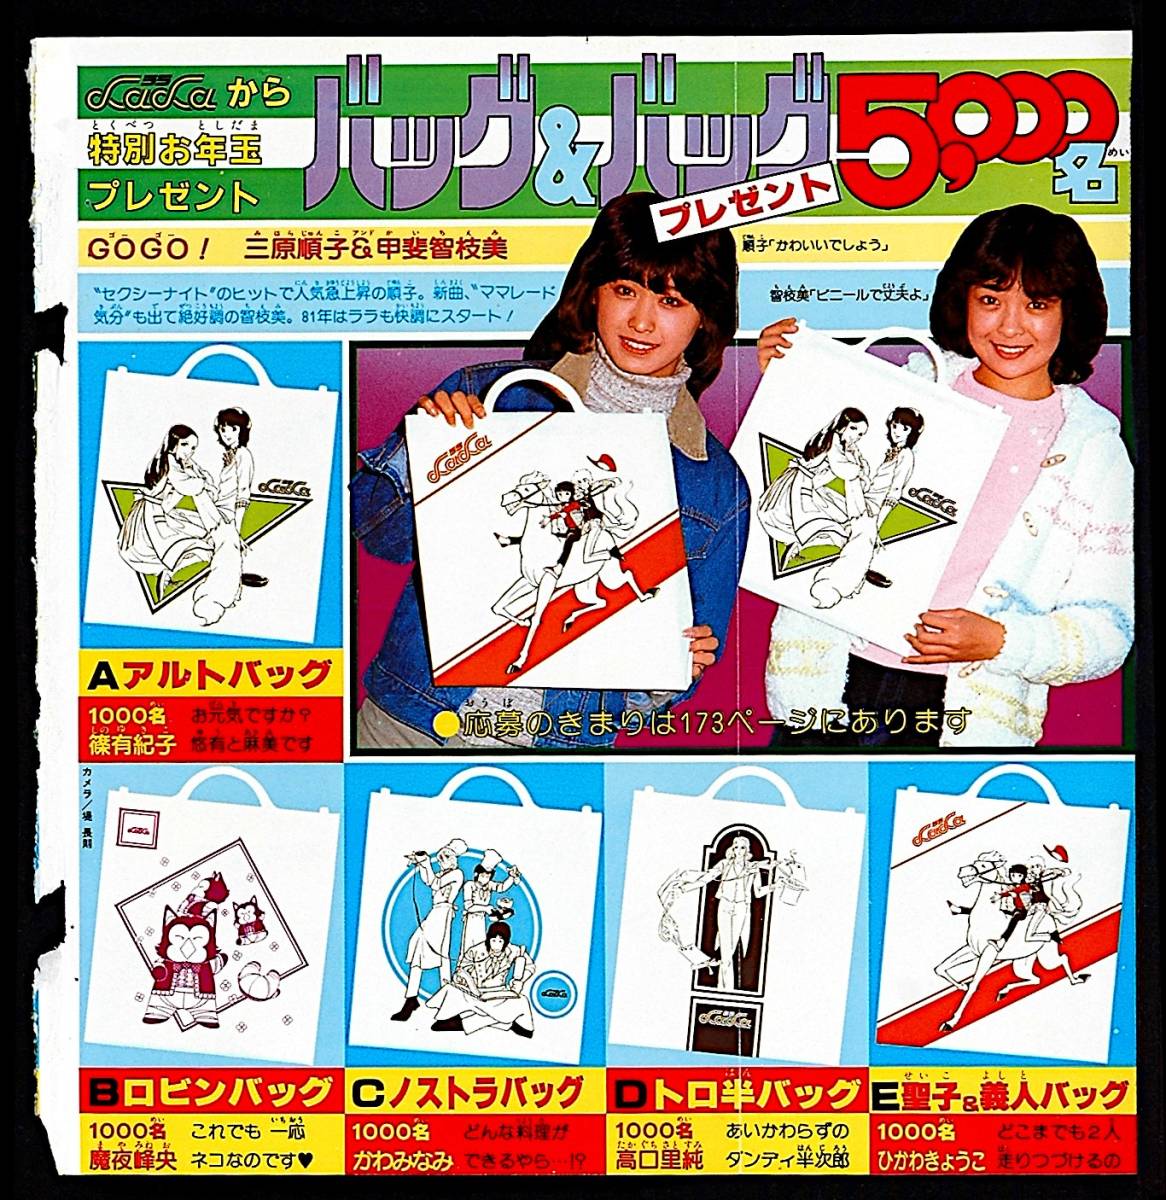 [Vintage][Not Displayed][Delivery Free]1980s LaLa Yasuko Aoike Z PinUp /エロイカより愛をこめて -ツェット-青池保子Z [tag5505]_画像6